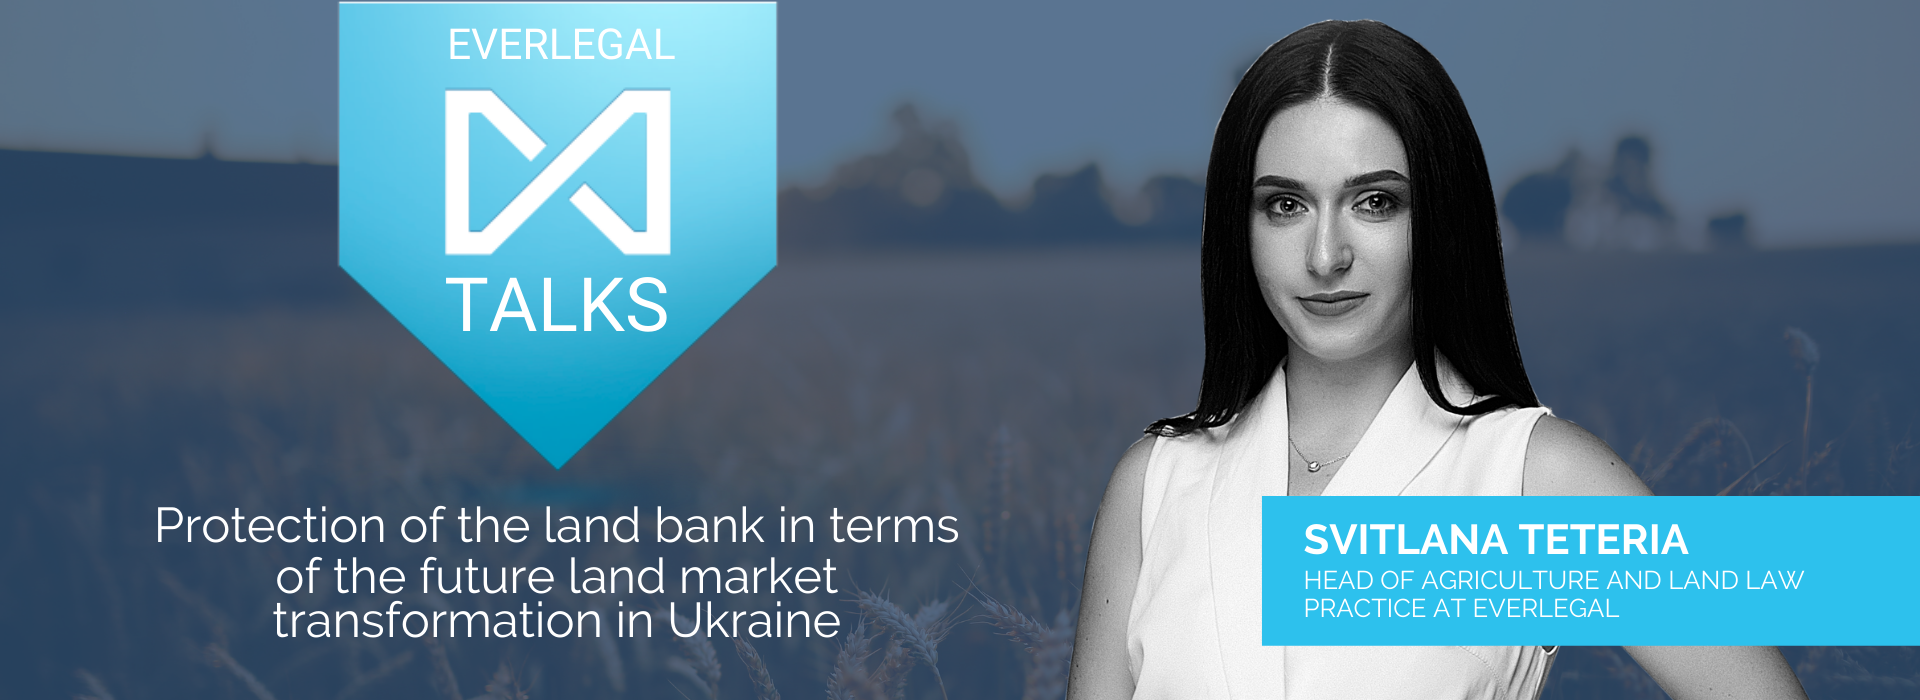 EverlegalTalks: Protection of the Land Bank in Terms of the Future Land Market Transformation in Ukraine